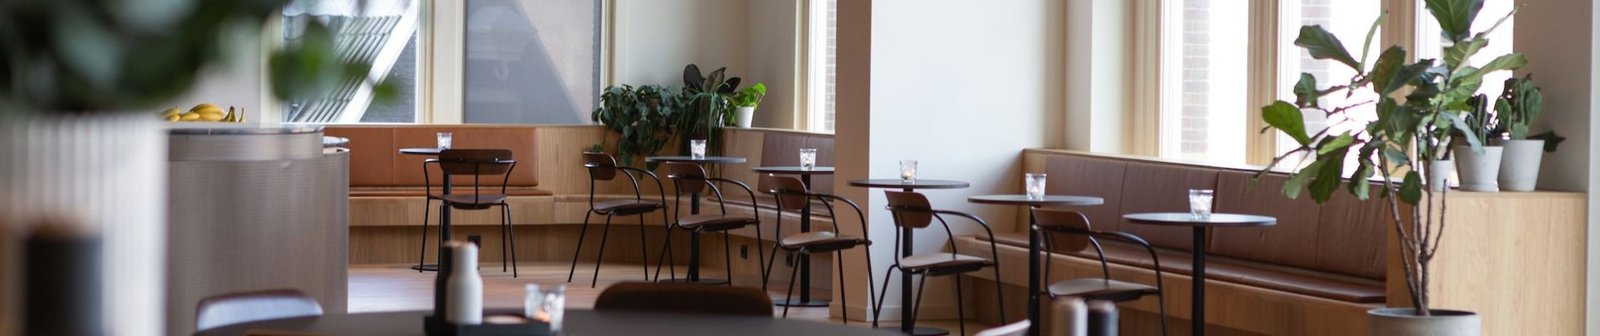 Dining within a coworking space